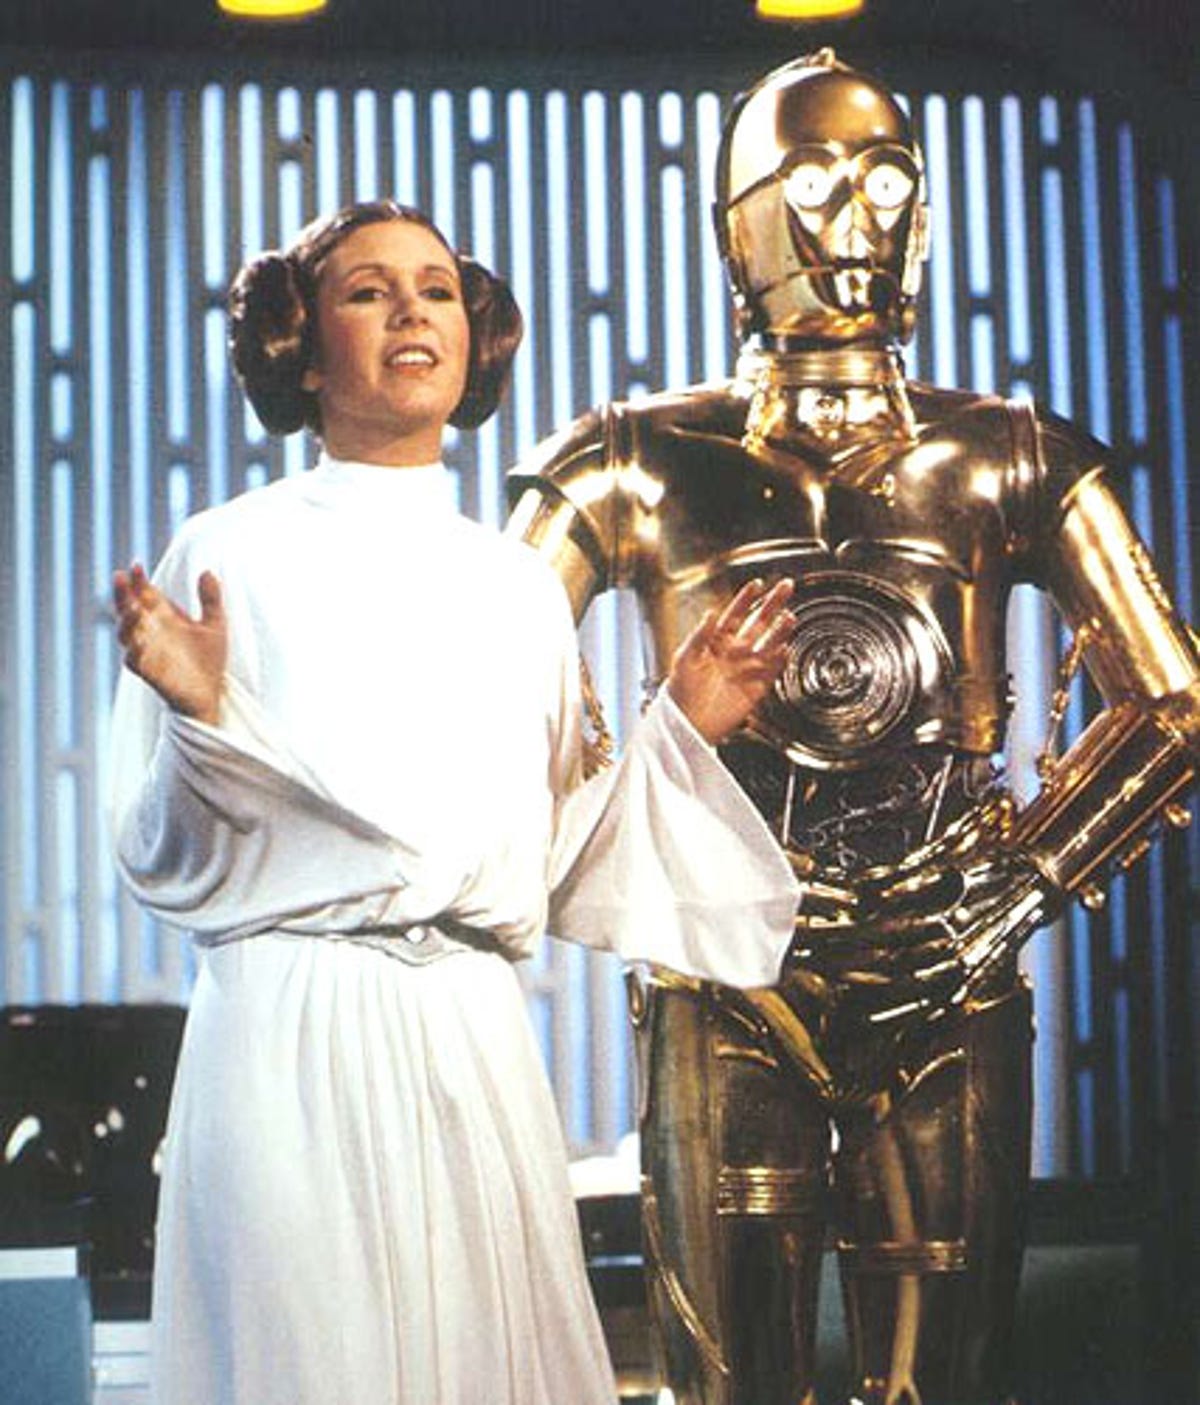 Princess Leia (Carrie Fisher) and C-3PO (Anthony Daniels) are comfortably numb in "The Star Wars Holiday Special."